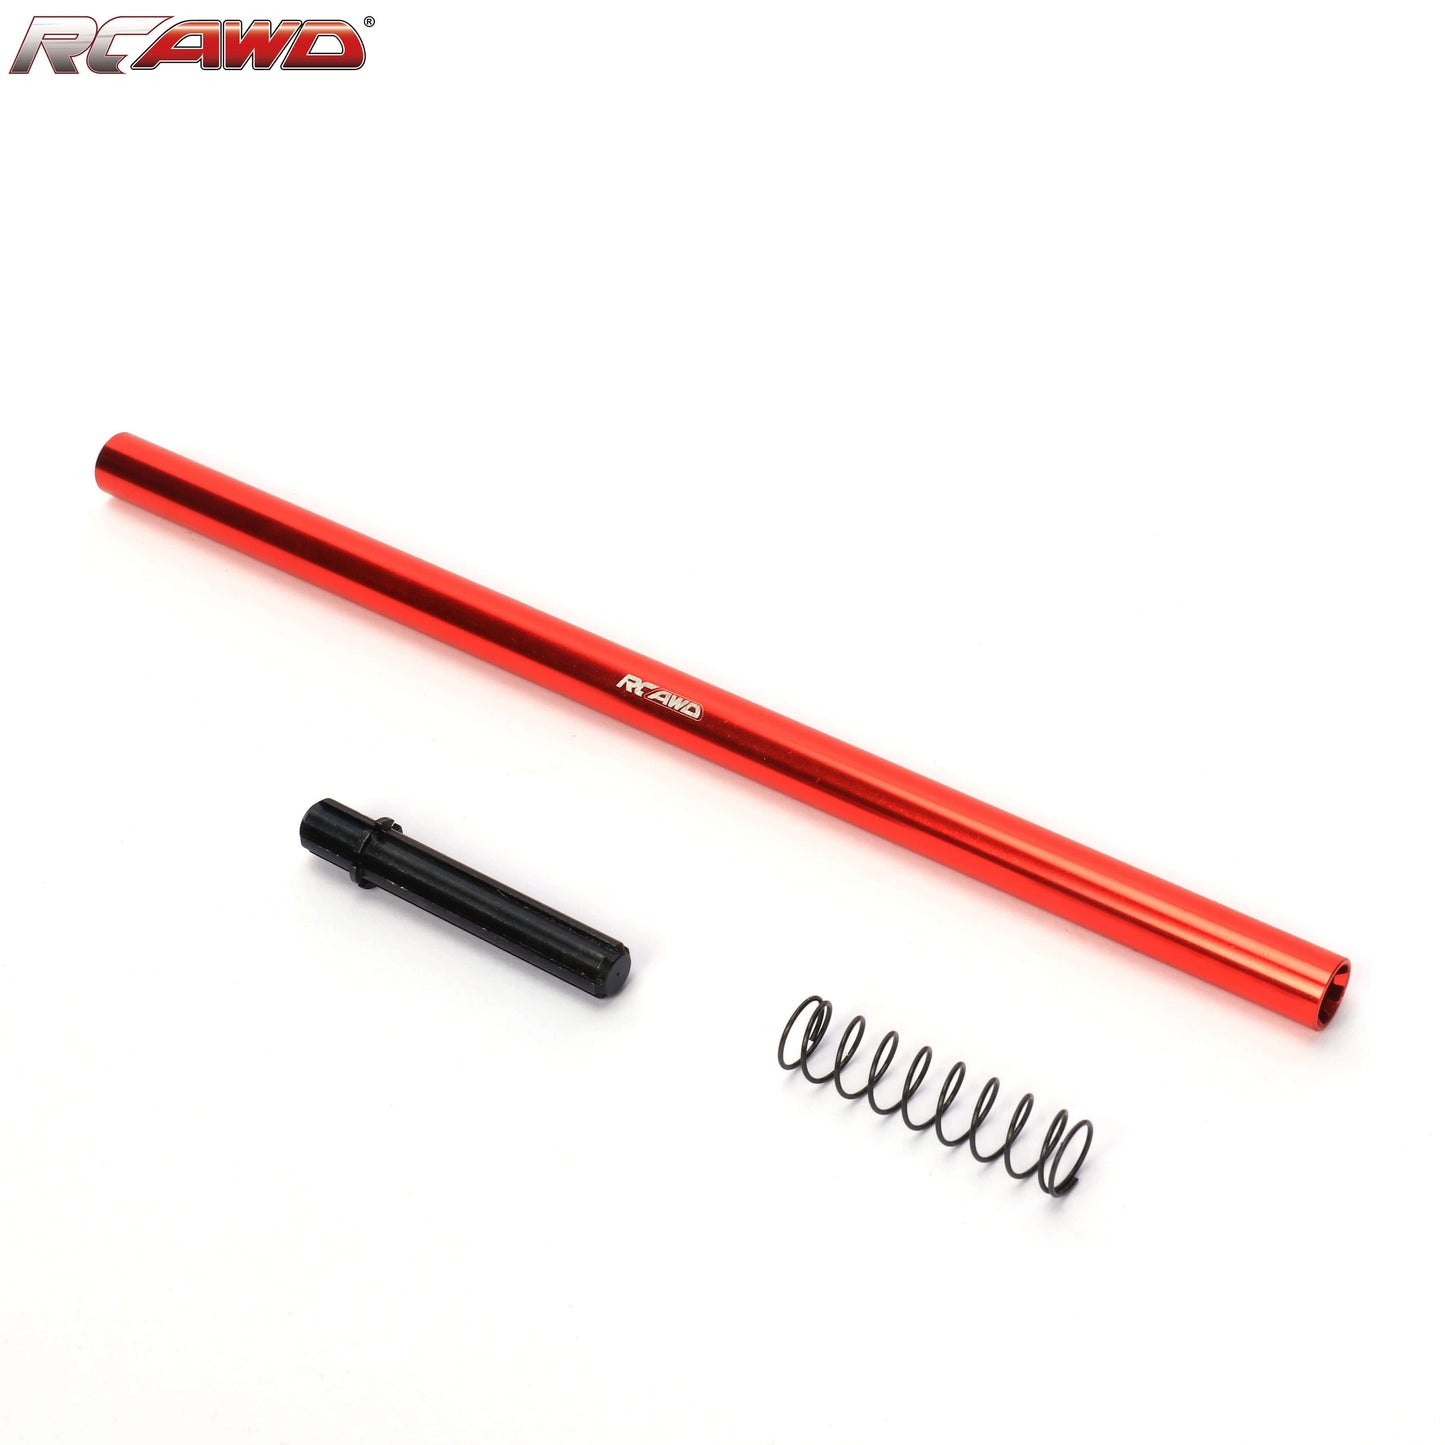 RCAWD ARRMA 4S RCAWD Arrma 3S 4S upgrade parts center driveshaft for OUTCAST Vendetta SENTON TYPHON Infraction BIG ROCK A-ARAC3955